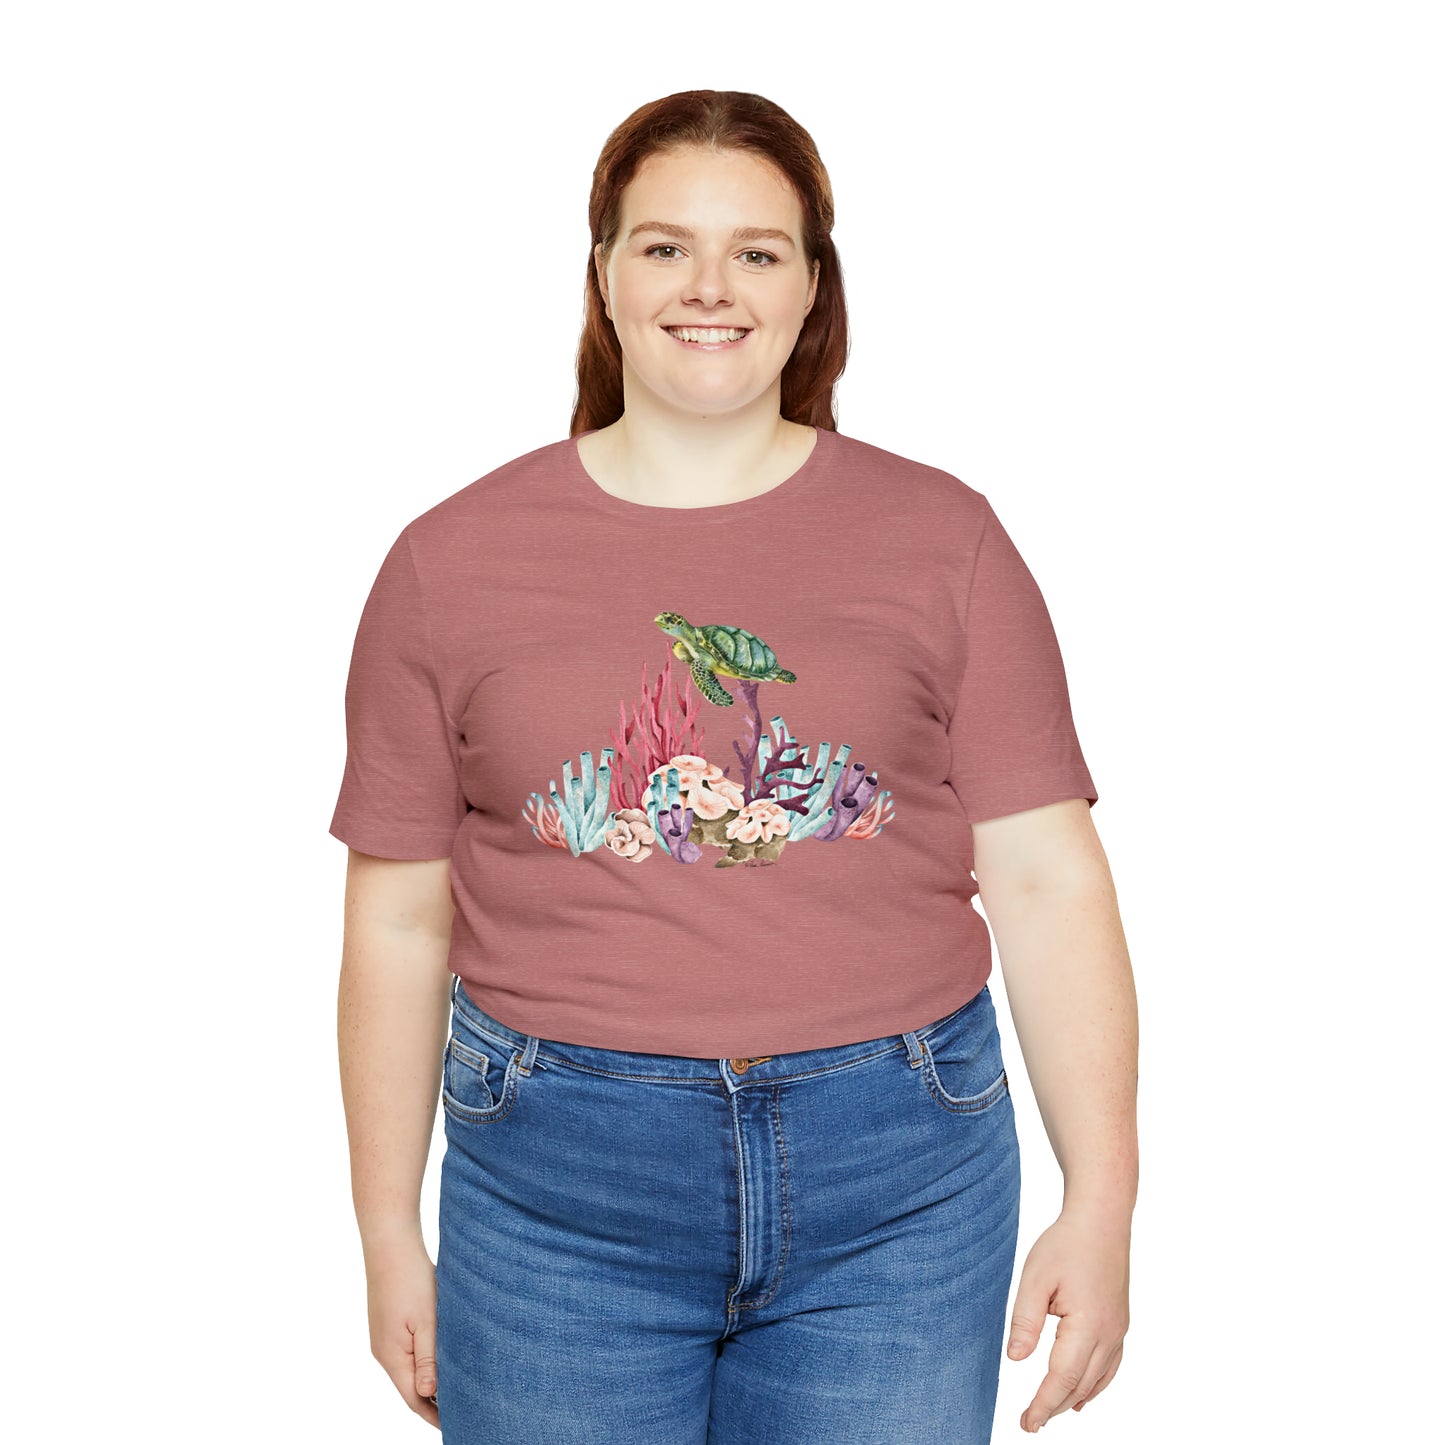 Mock up of a large woman wearing the mauve shirt